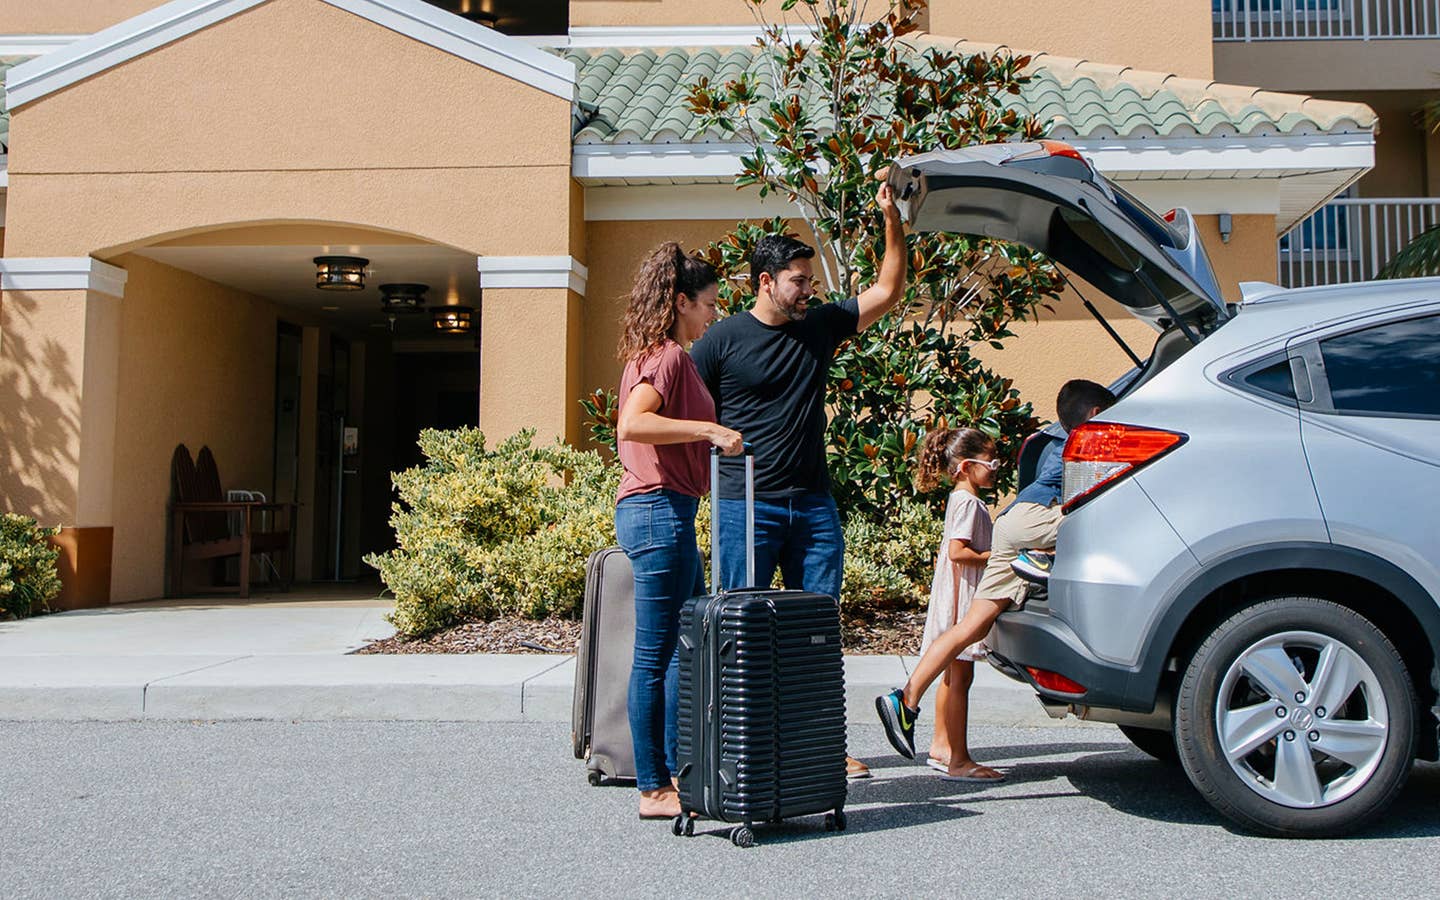 A woman, man and young boy and girl unpack a silver vehicle outside of a resort.